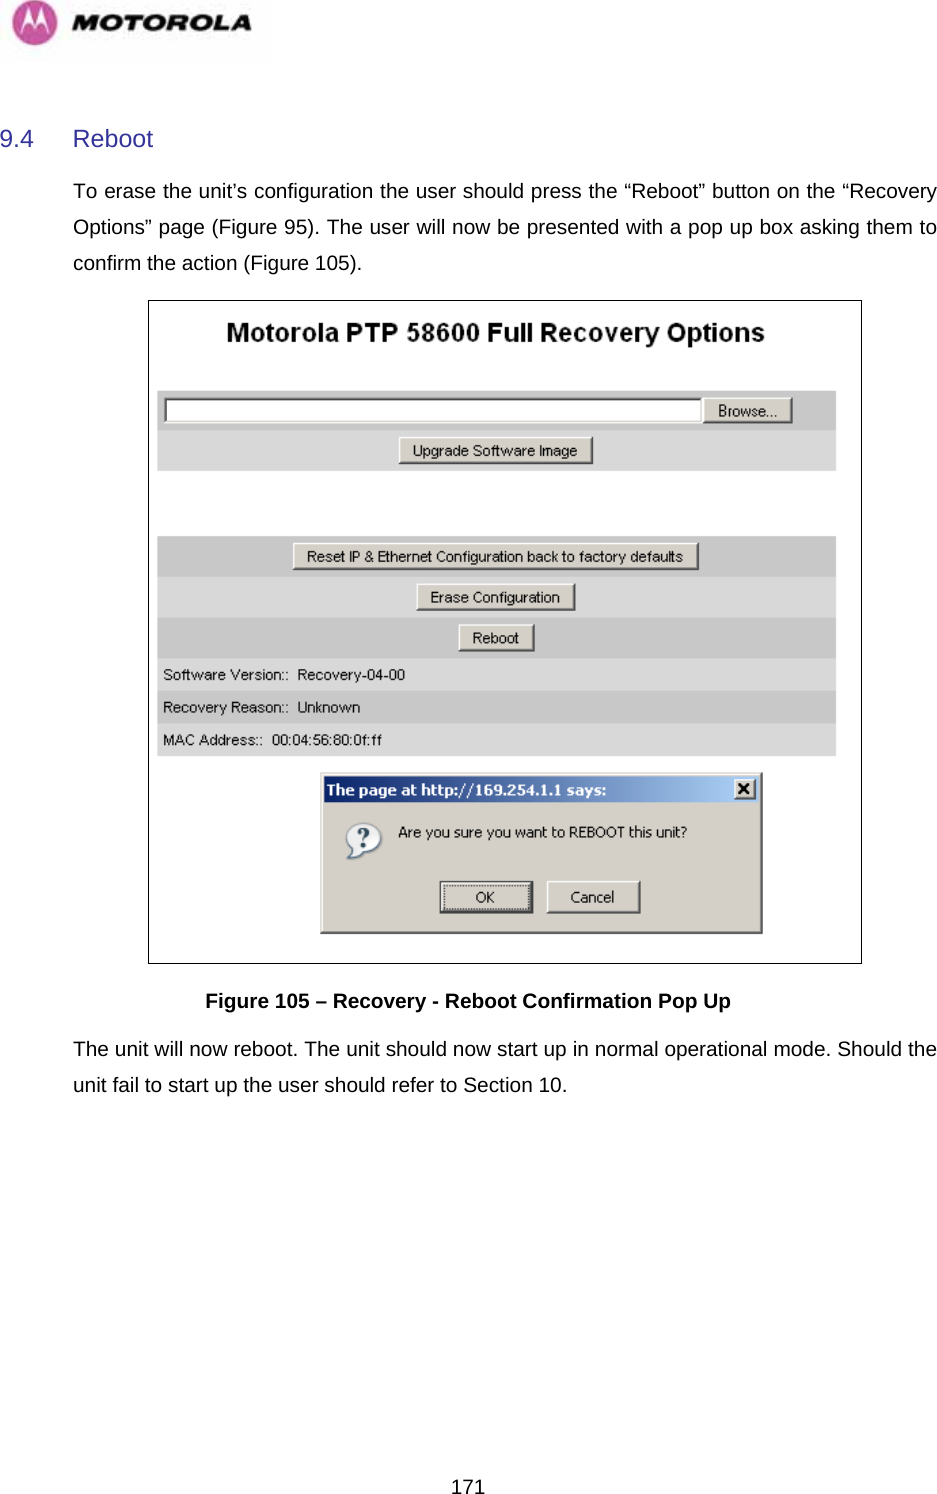   1719.4 Reboot To erase the unit’s configuration the user should press the “Reboot” button on the “Recovery Options” page (Figure 95). The user will now be presented with a pop up box asking them to confirm the action (Figure 105).  Figure 105 – Recovery - Reboot Confirmation Pop Up The unit will now reboot. The unit should now start up in normal operational mode. Should the unit fail to start up the user should refer to Section 10. 